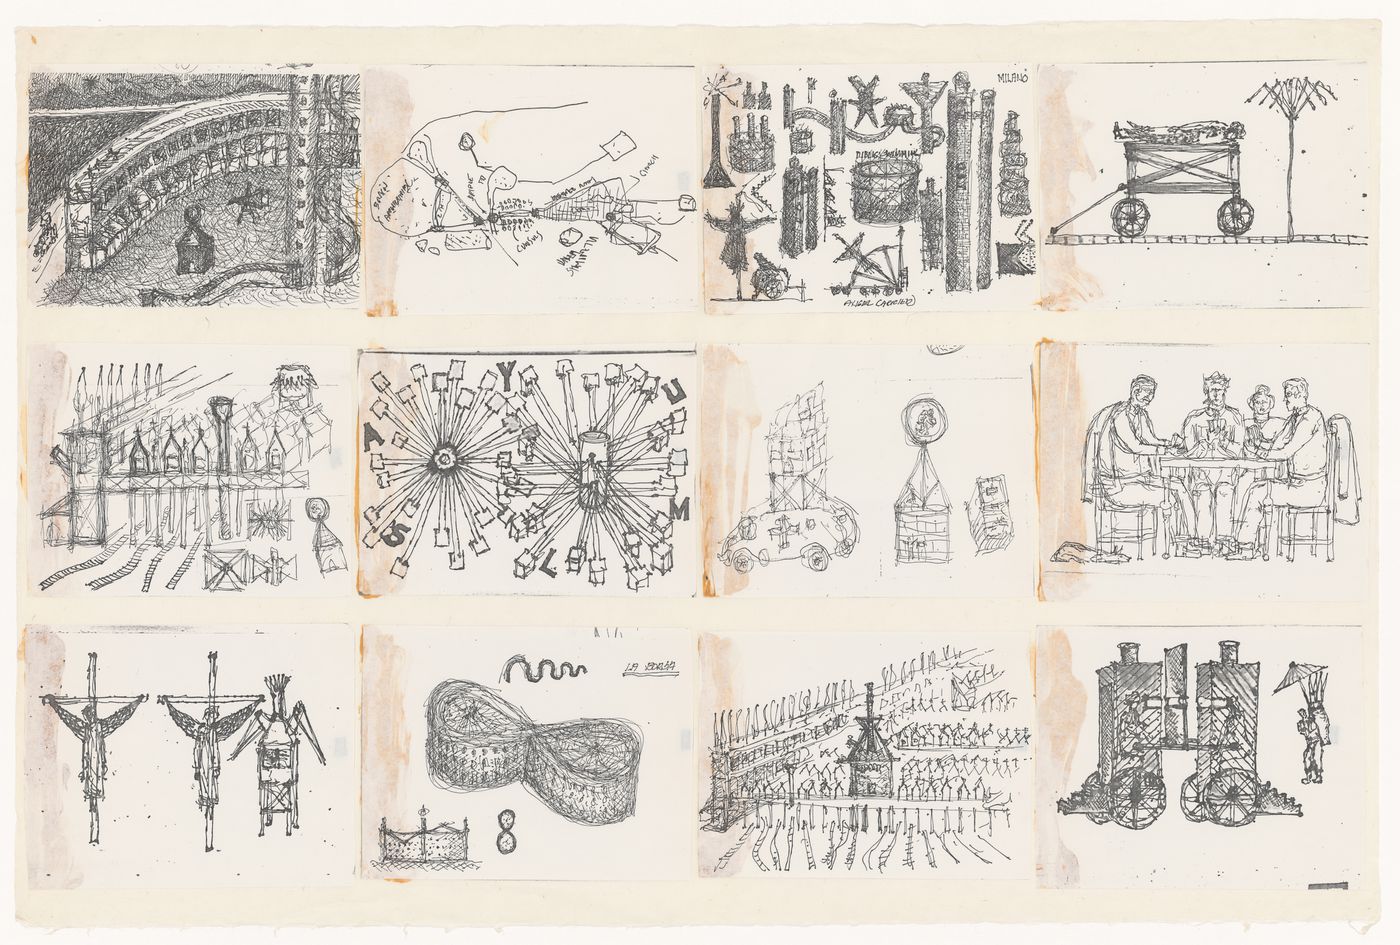 Third montage of 12 photocopied sketches, from Bovisa